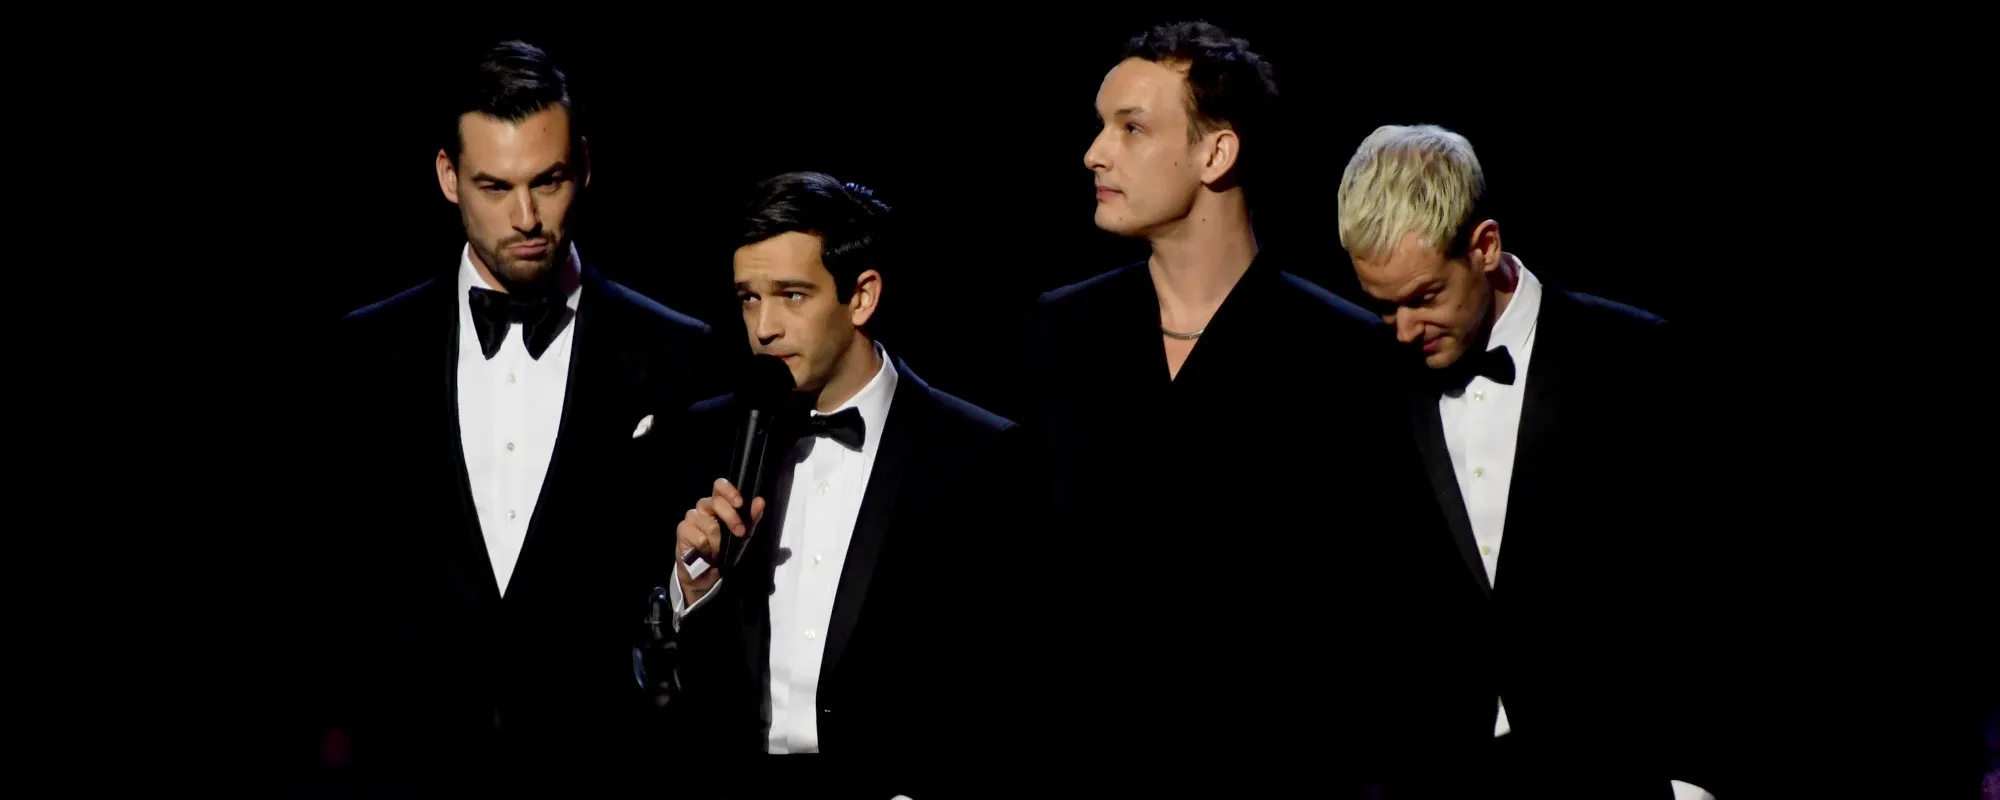 Watch: The 1975 Perform “I’m In Love With You” and “Oh Caroline” on ‘SNL’